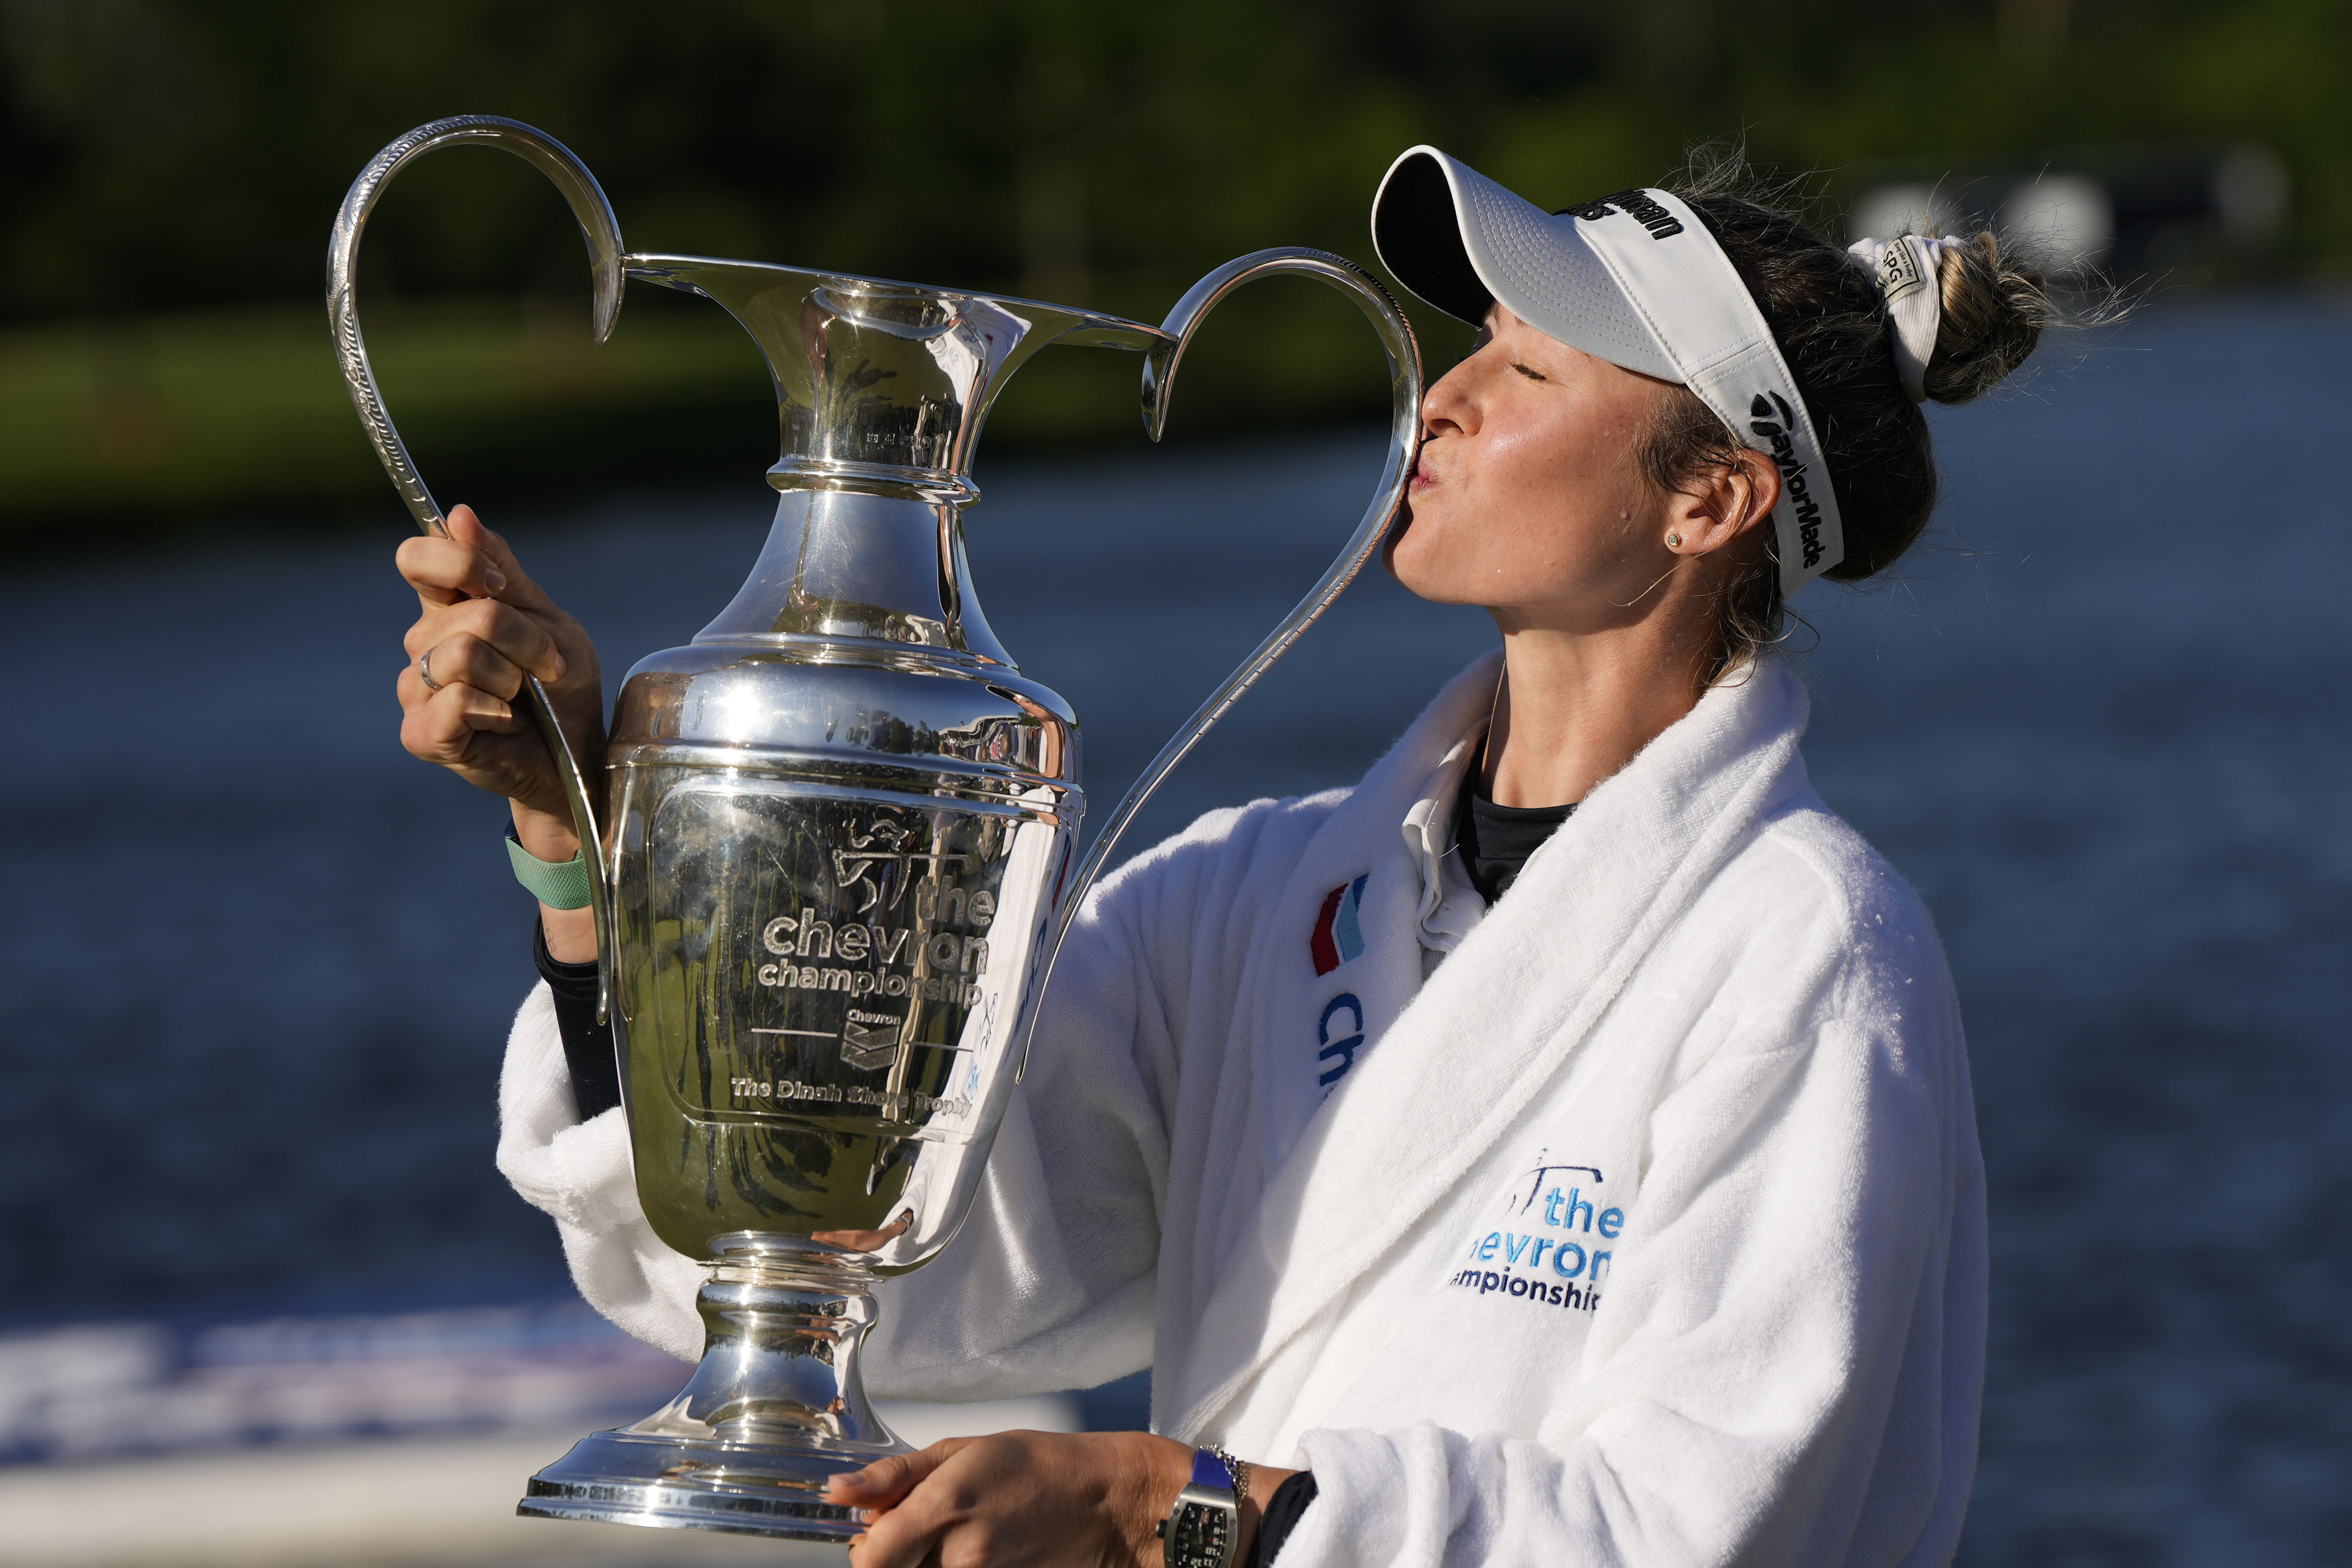 nelly korda ties lpga tour record with 5th straight victory, wins chevron championship for 2nd major